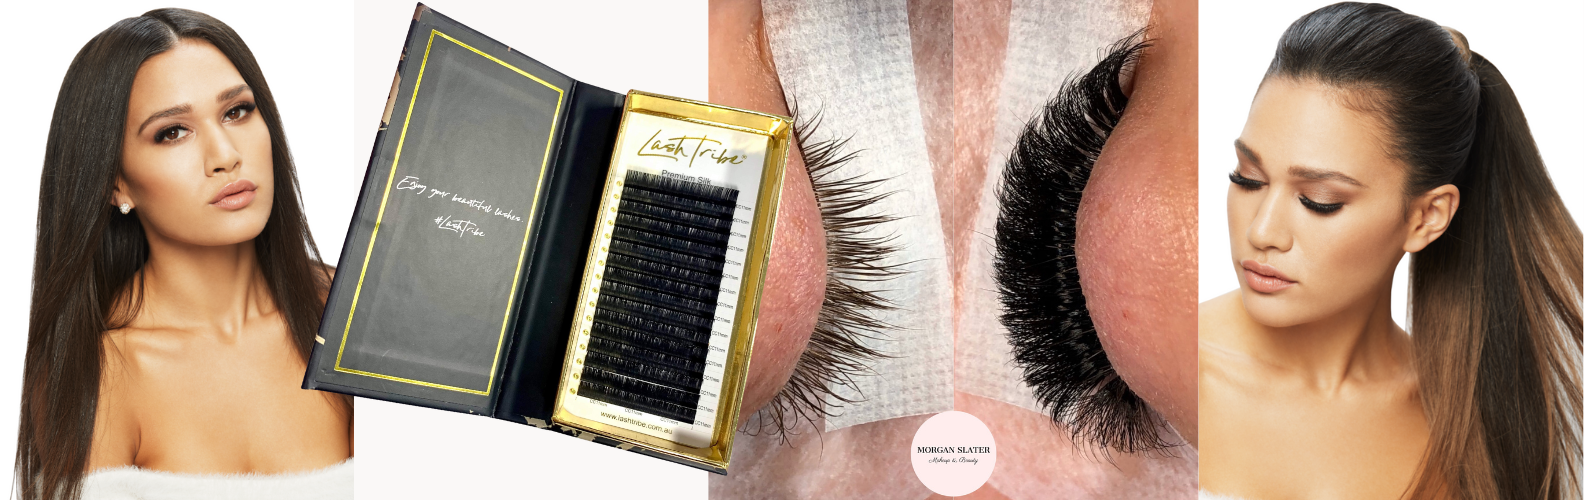 volume lashes pictures of girl and lash tray with before and after photo of eyelash extensions